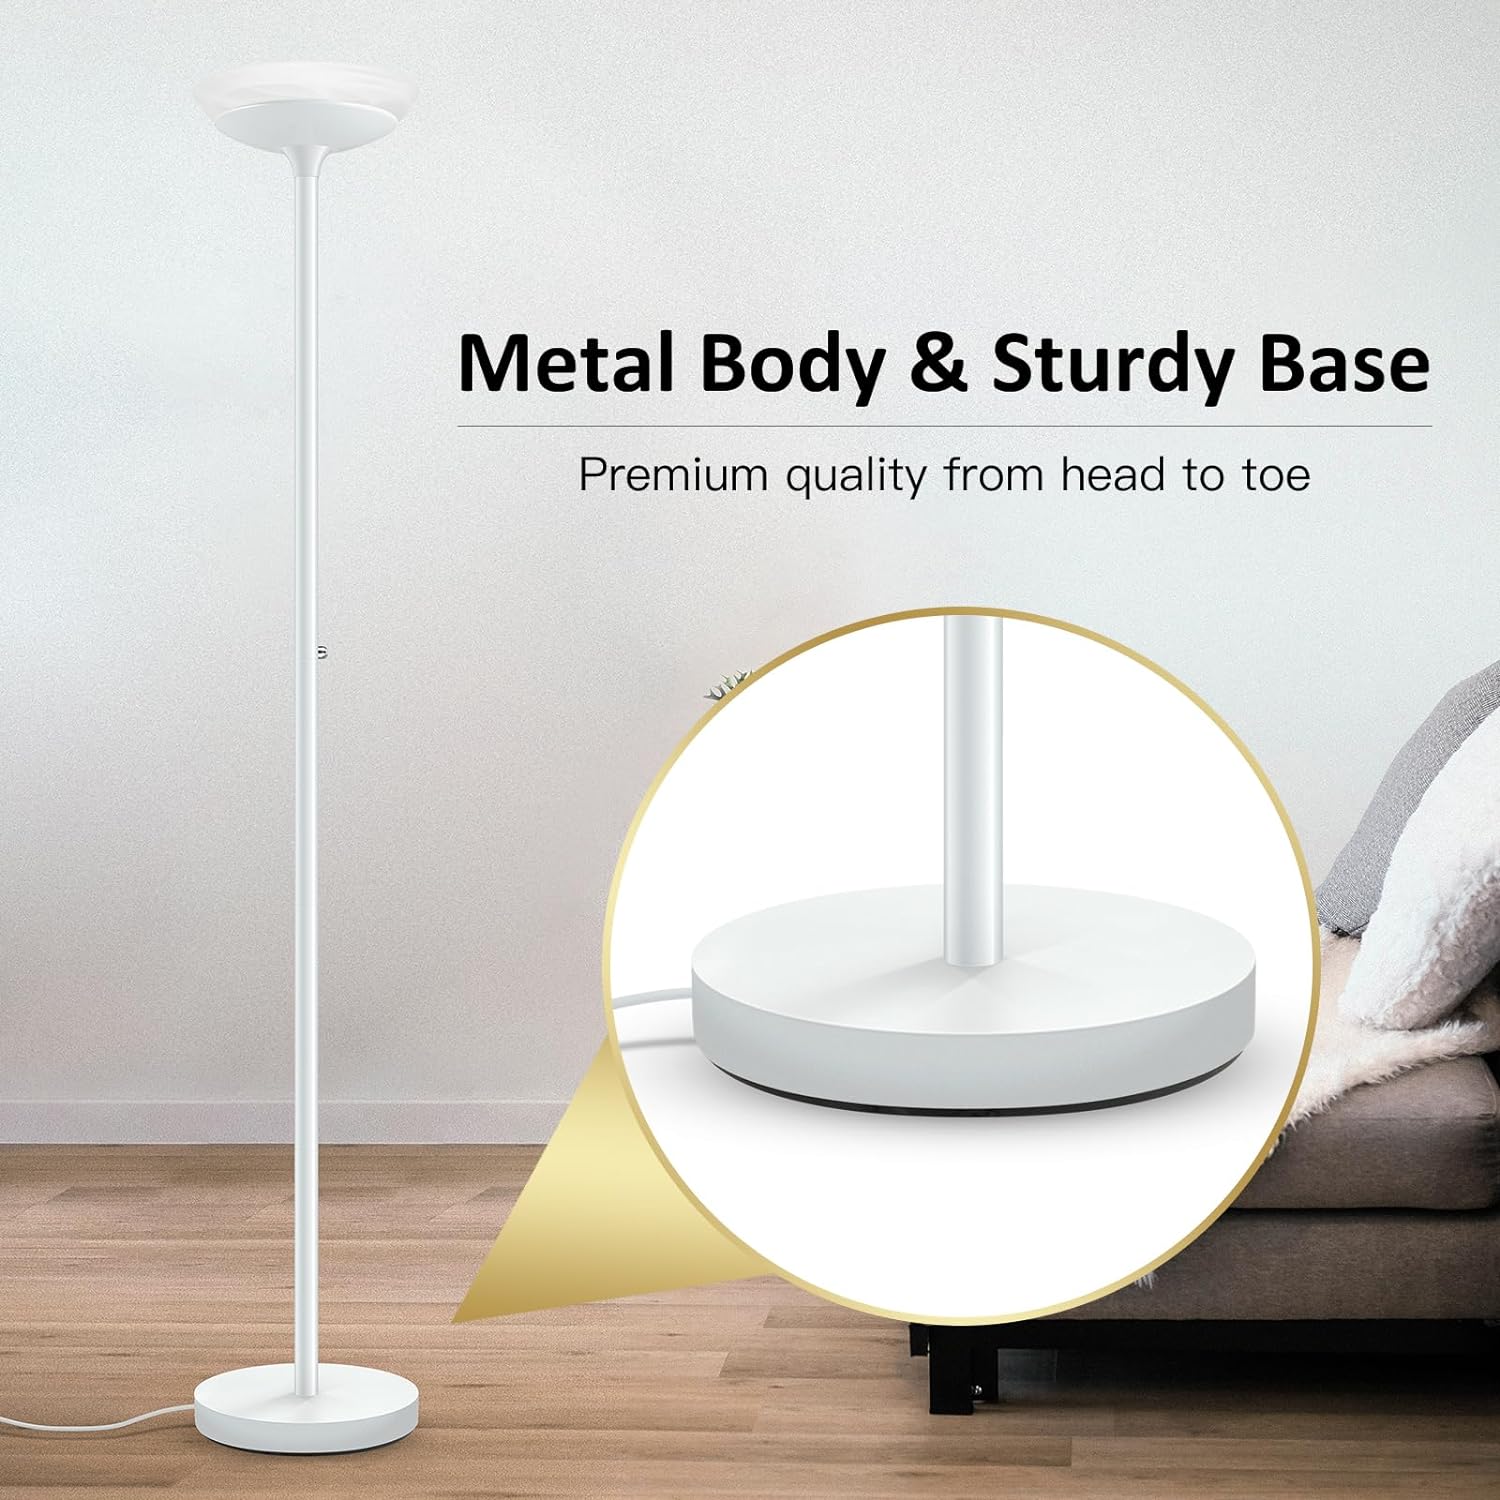 BoostArea Torchiere Floor Lamp: A Bright and Stylish Addition to Any Room